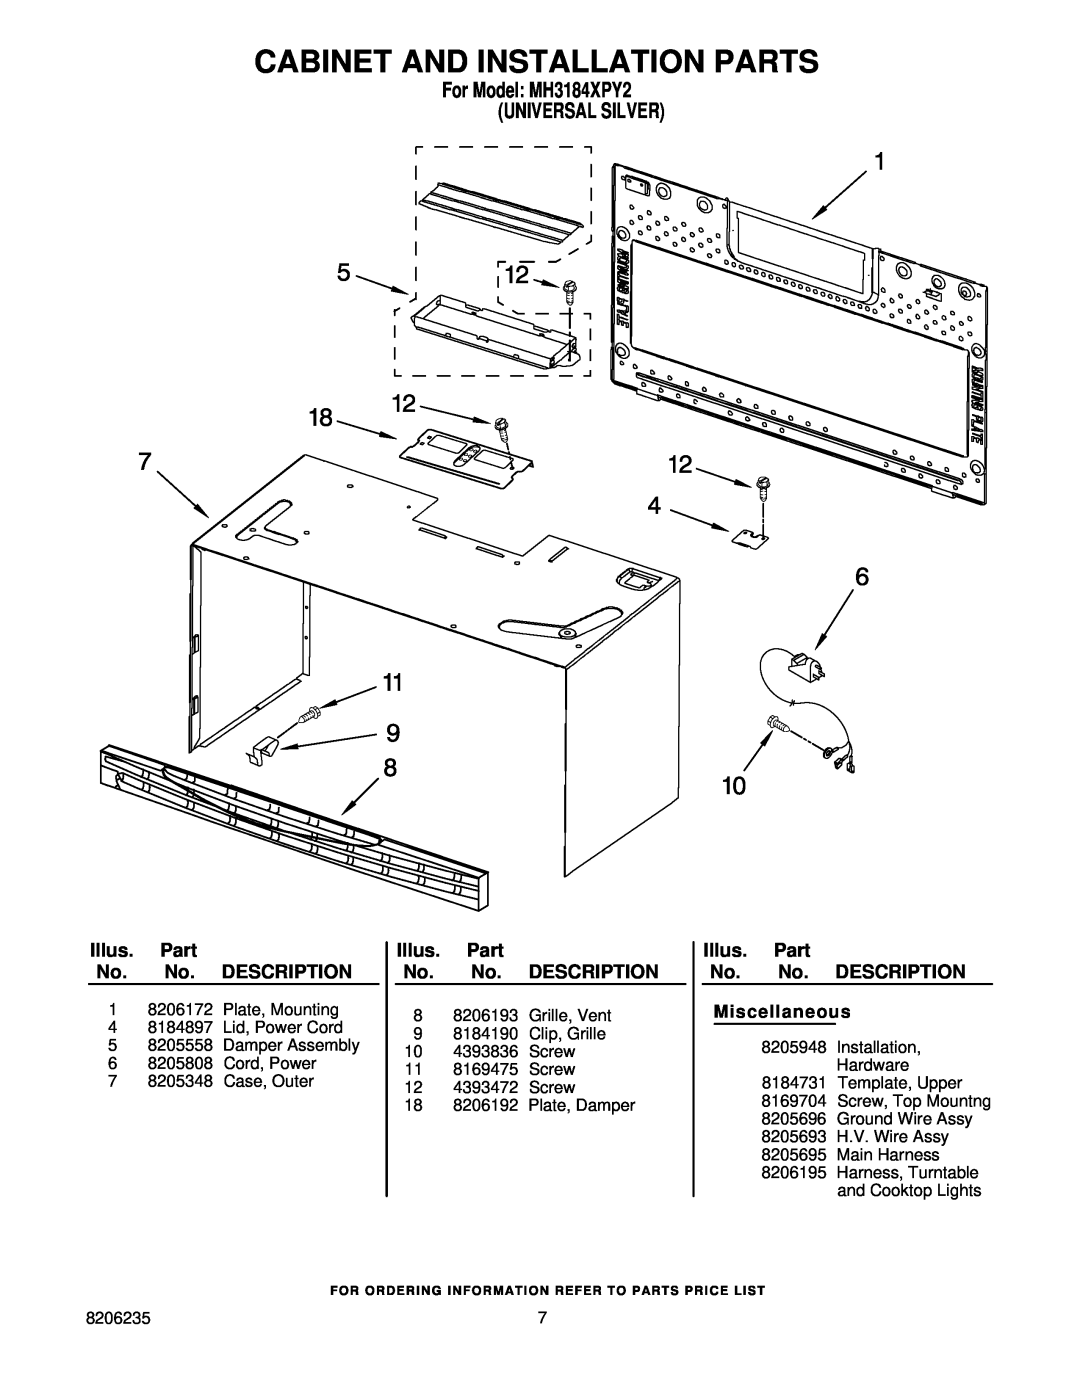 Whirlpool MH3184XPY2 manual Cabinet And Installation Parts, Illus. Part No. No. DESCRIPTION Miscellaneous 